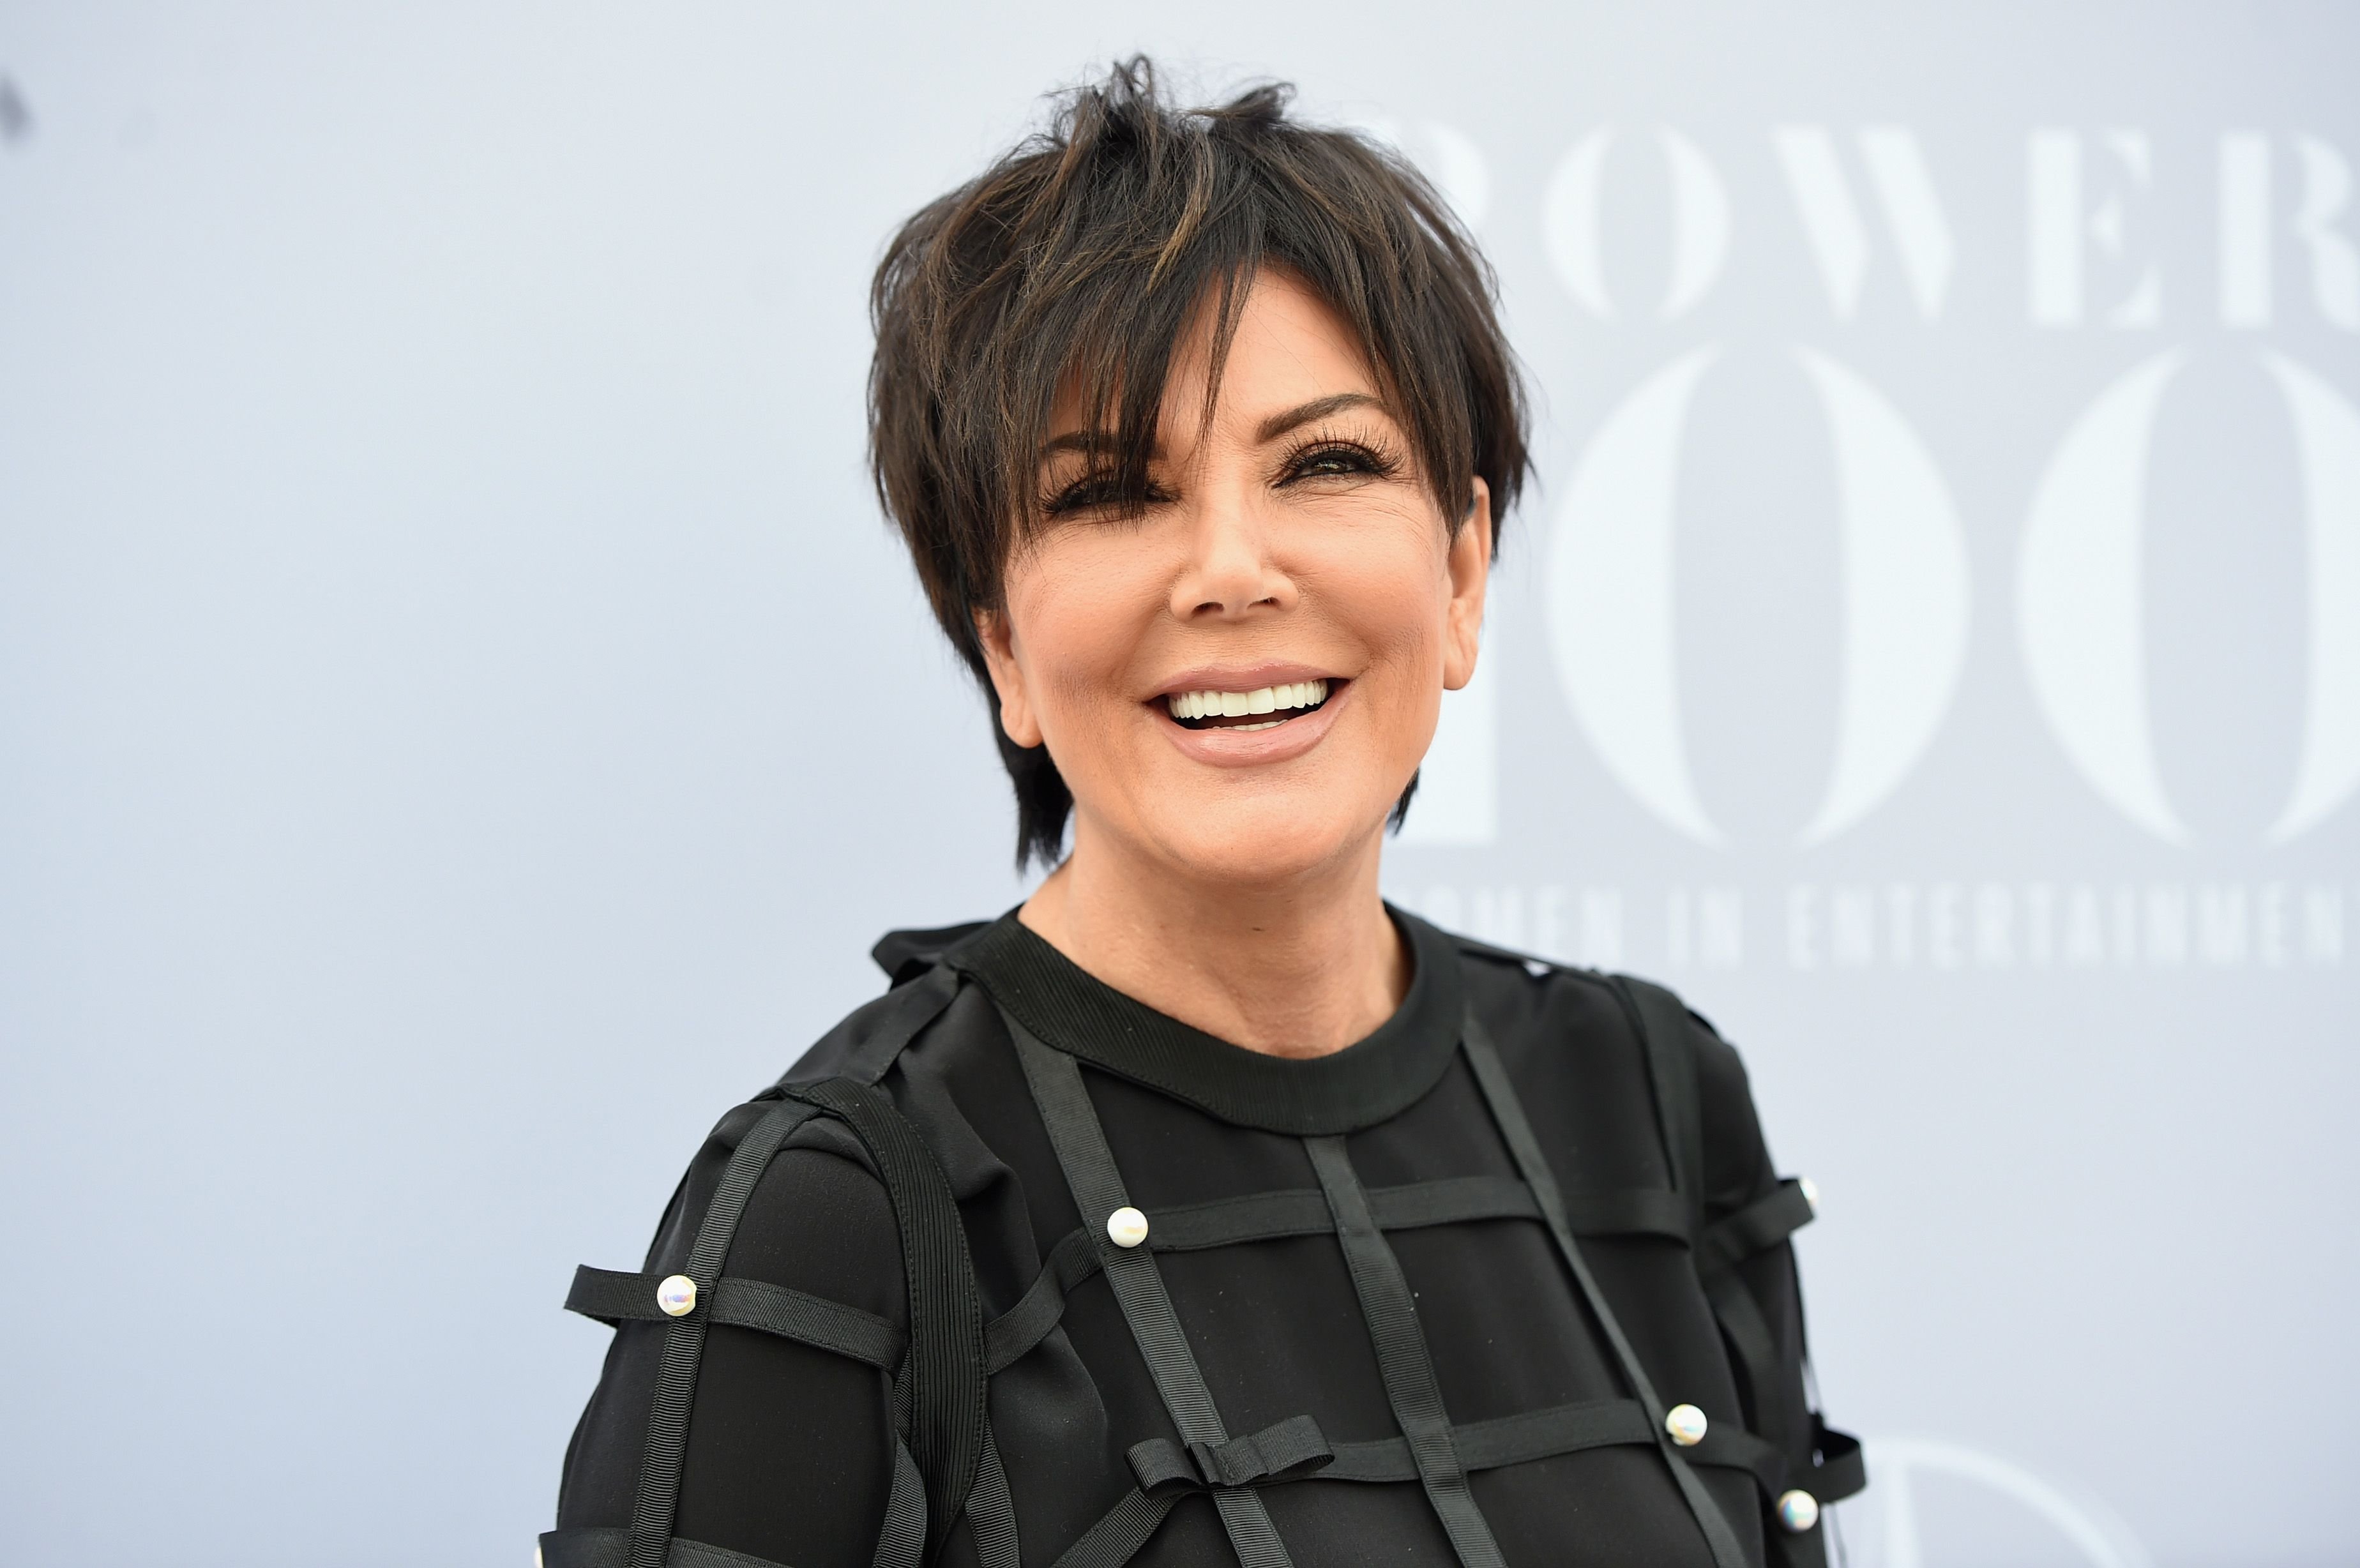 Kris Jenner at the 24th annual Women in Entertainment Breakfast at Milk Studios on December 9, 2015 in Los Angeles, California.| Photo: Getty Images